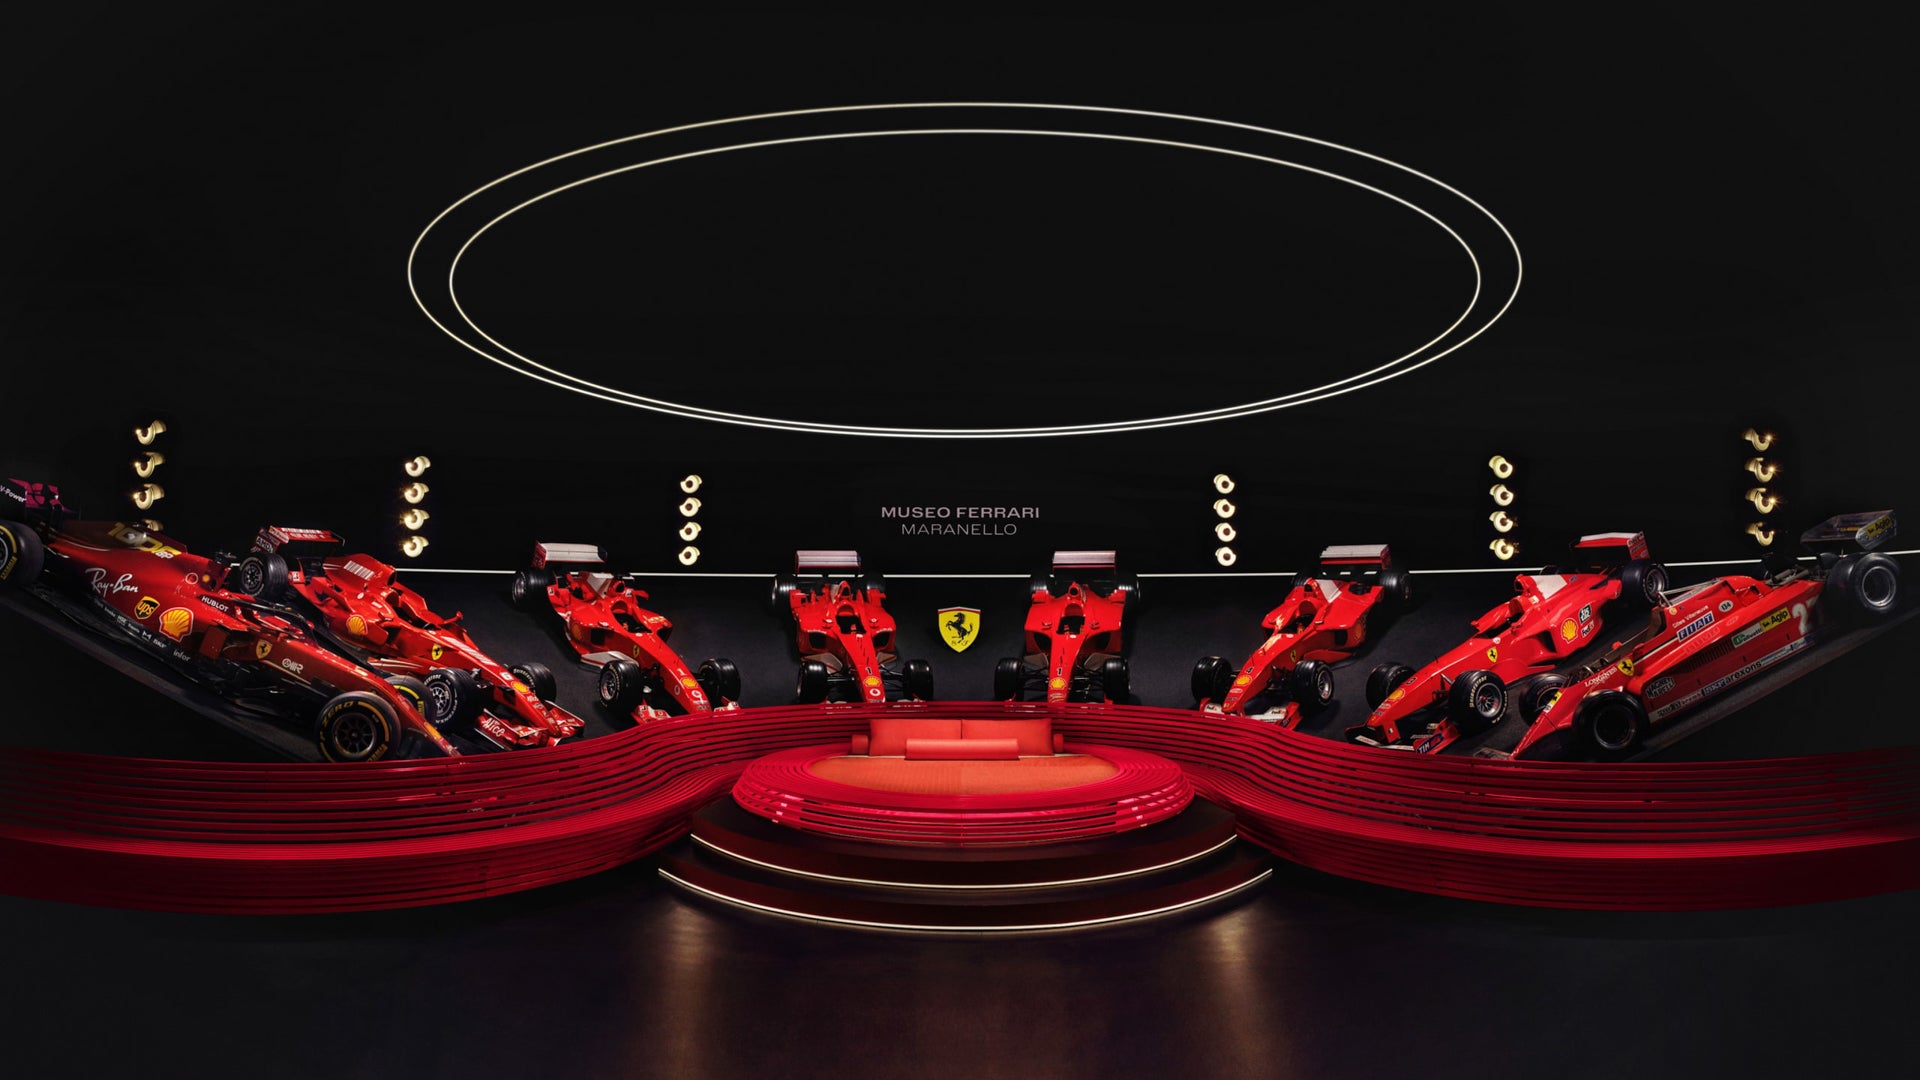 Now, you can book a stay at the Ferrari Museum on Airbnb.